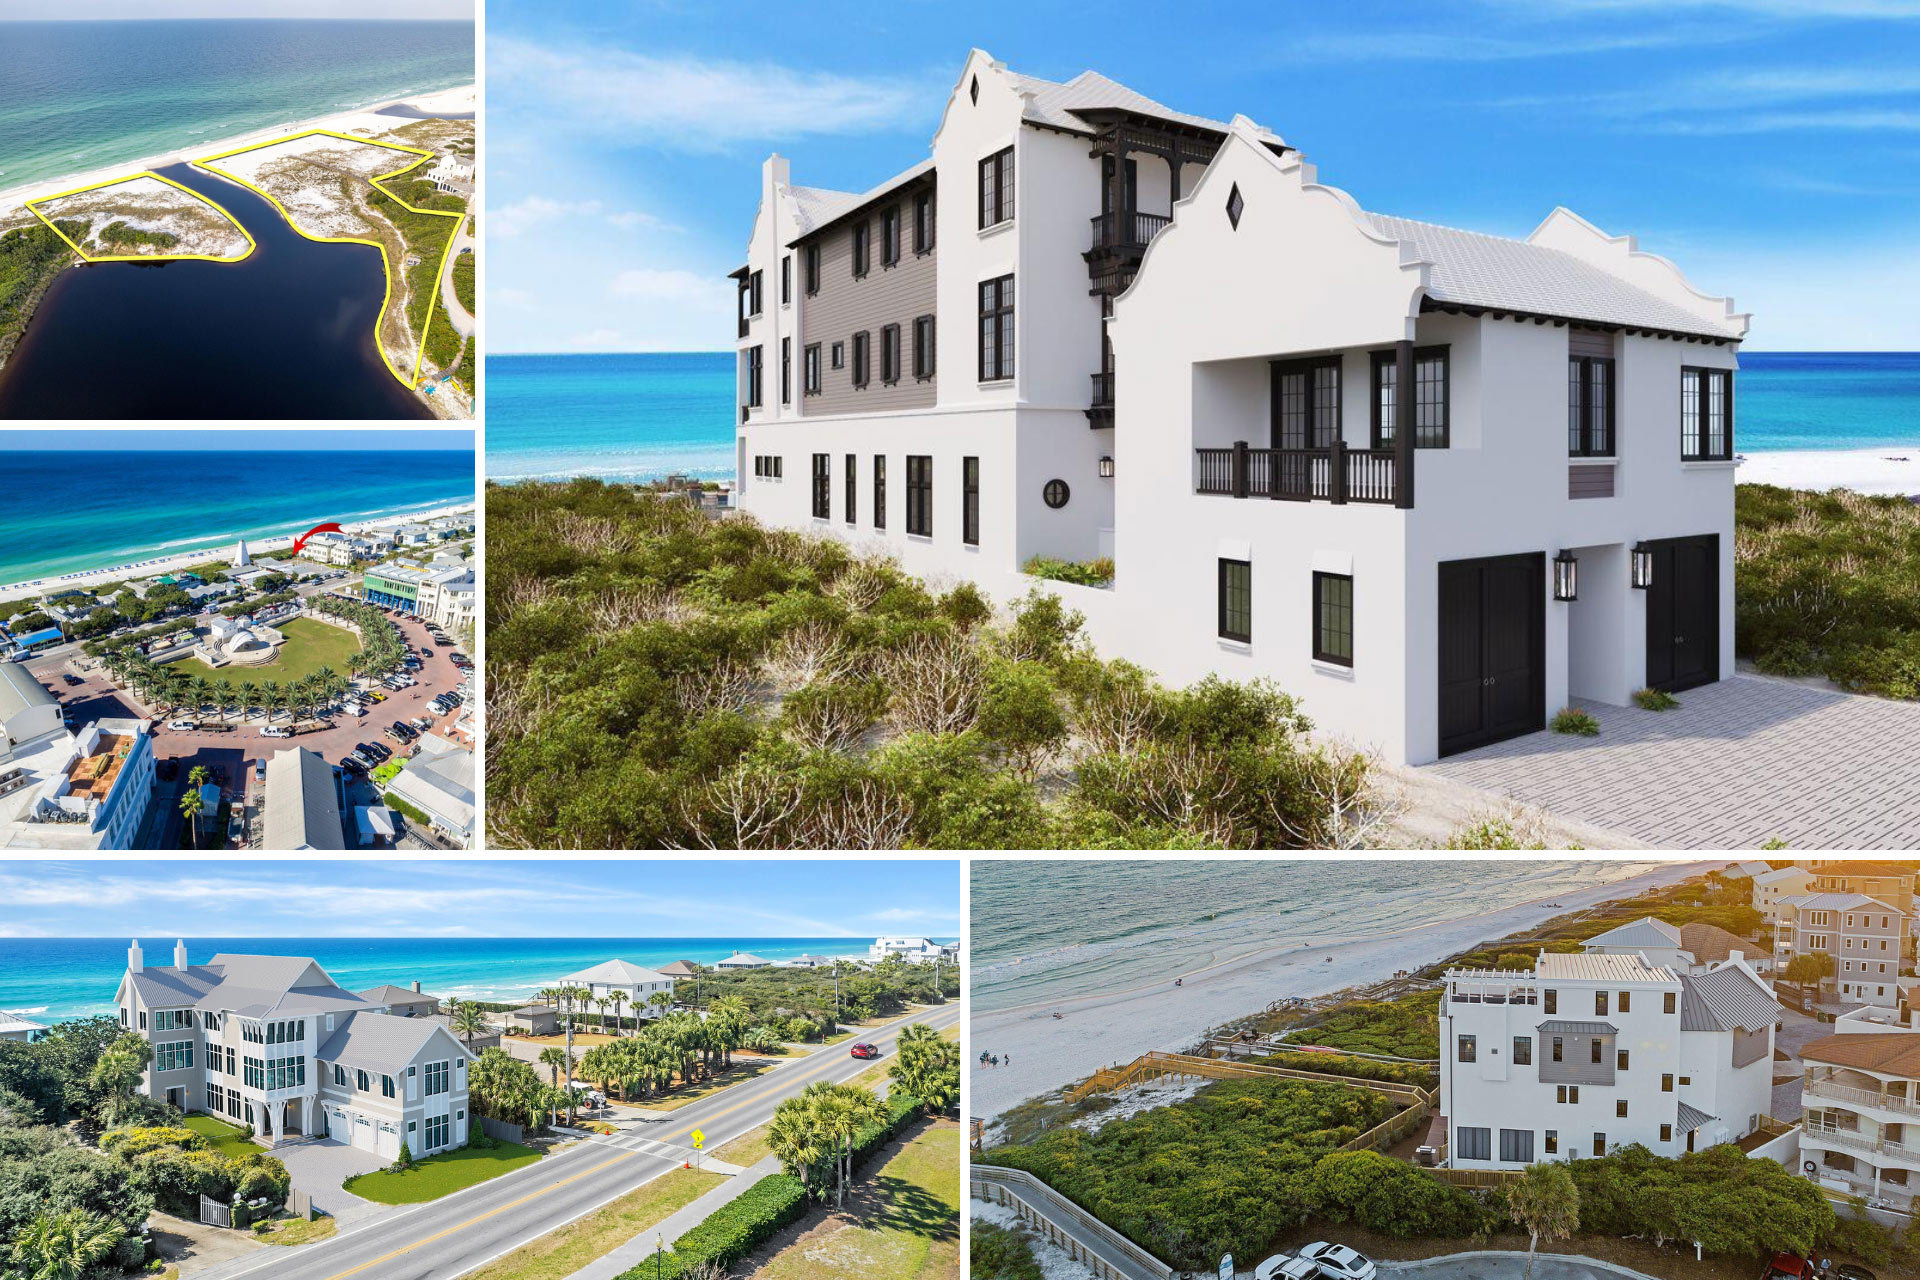 30A Homes for Sale for Powerball Winners